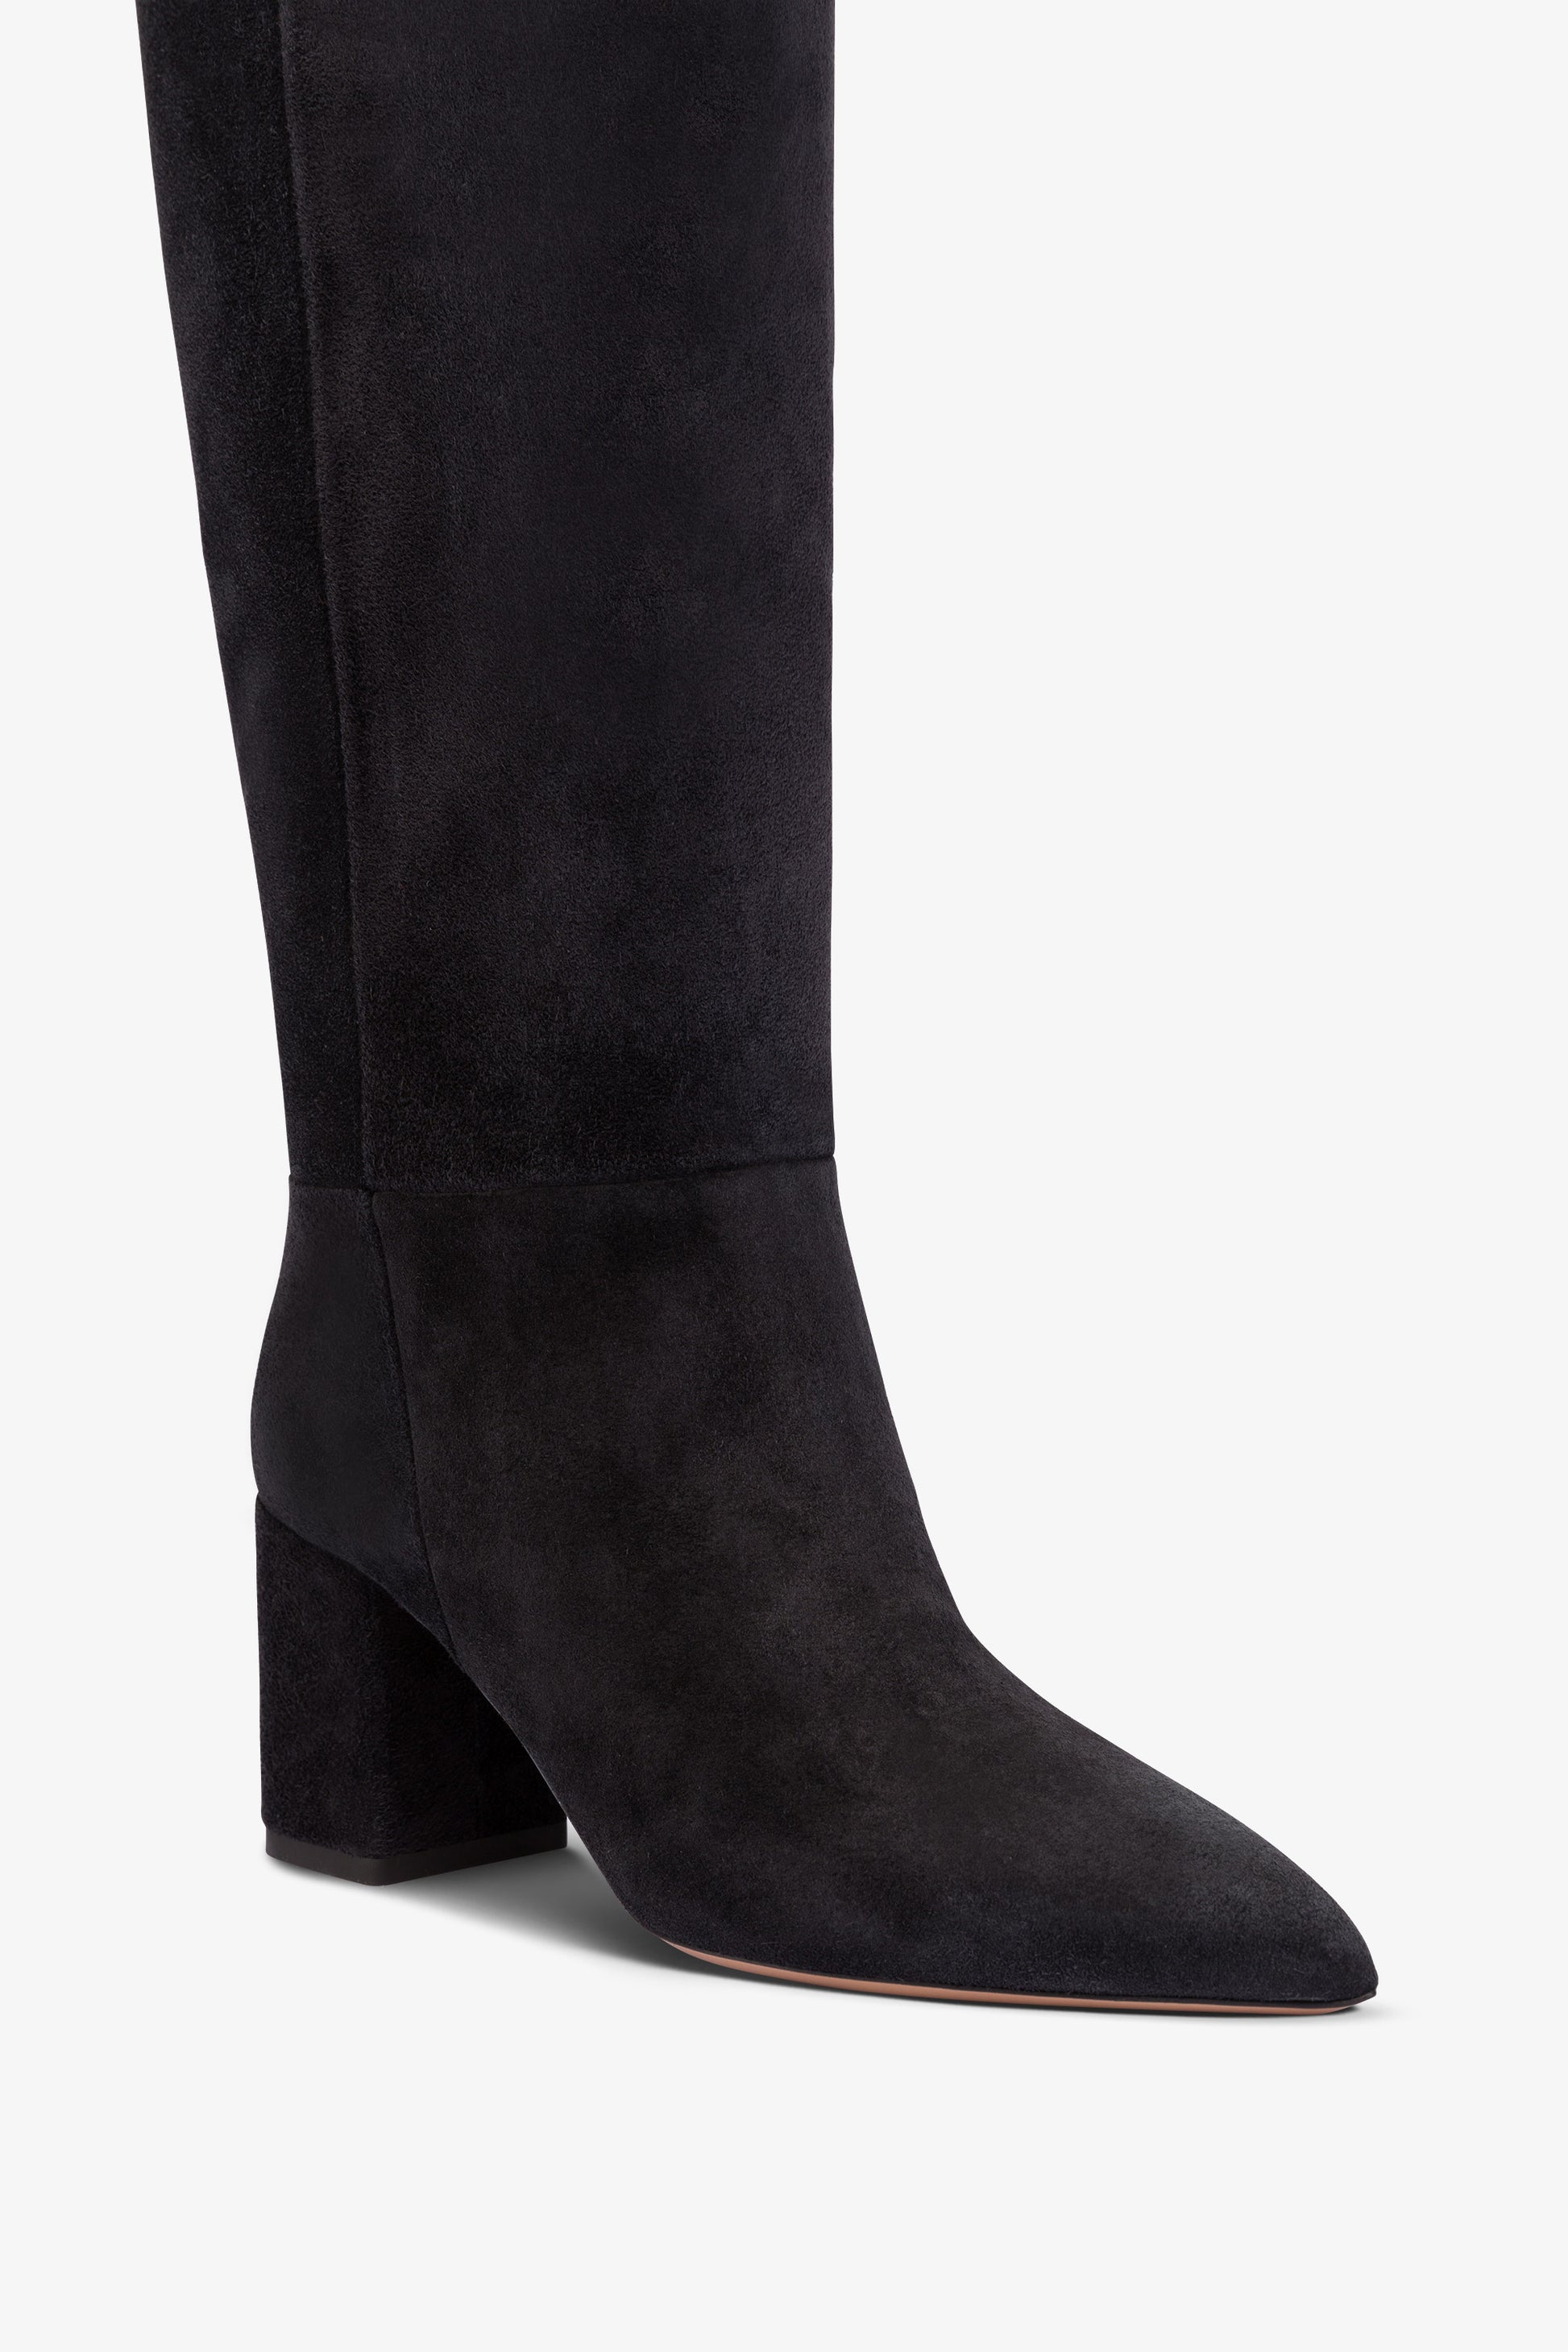 Over-the-knee, long, pointed boots in off-black suede leather